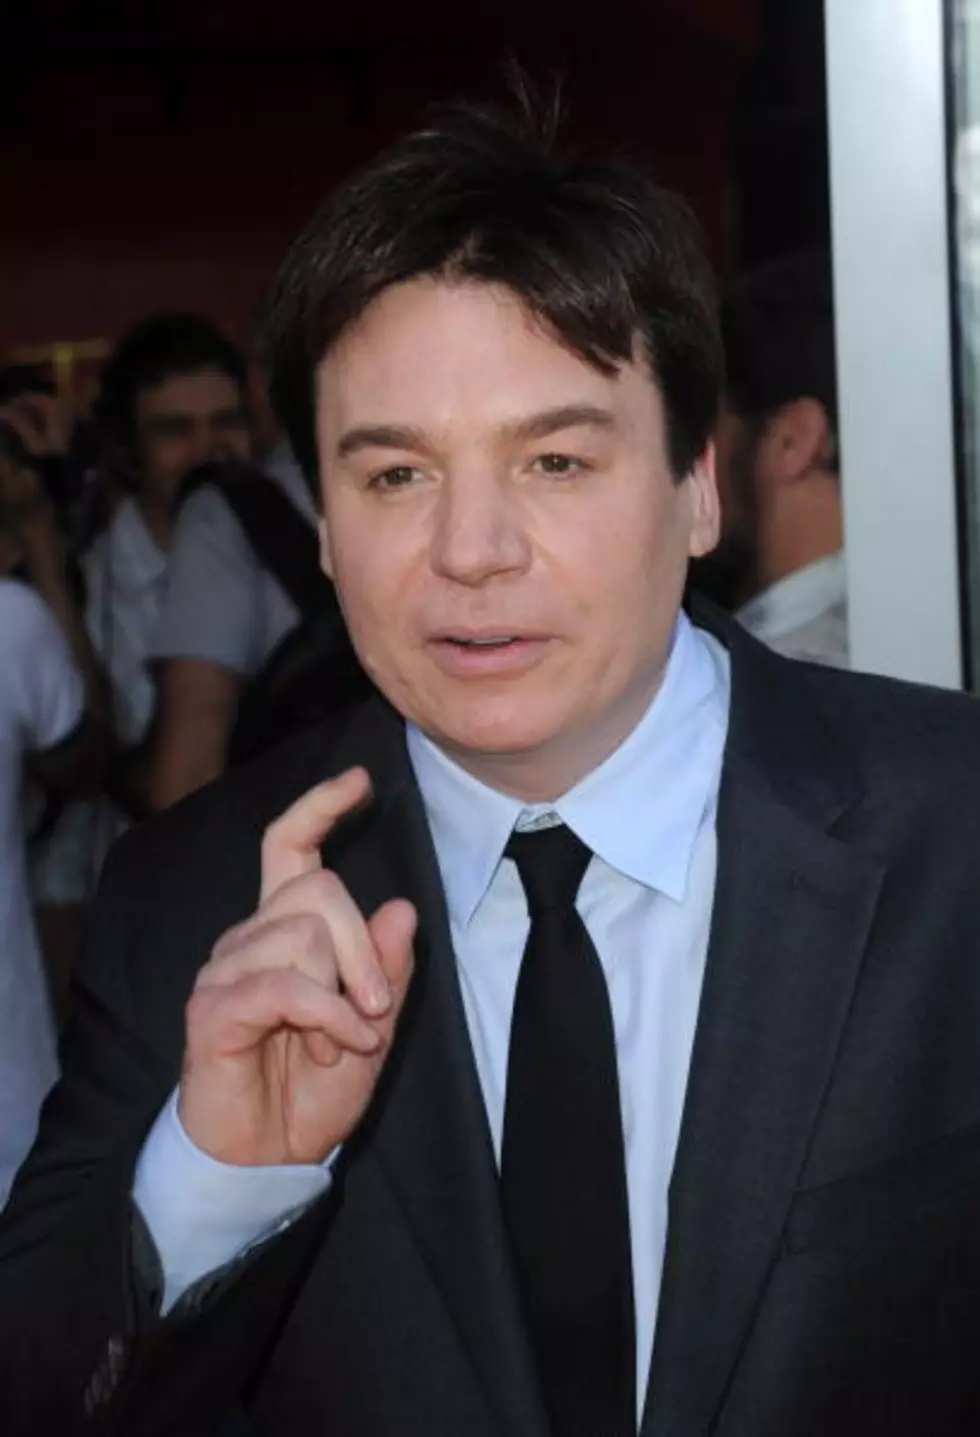 Wednesday’s Celebrity Birthdays Include Mike Myers, Yeah baby!